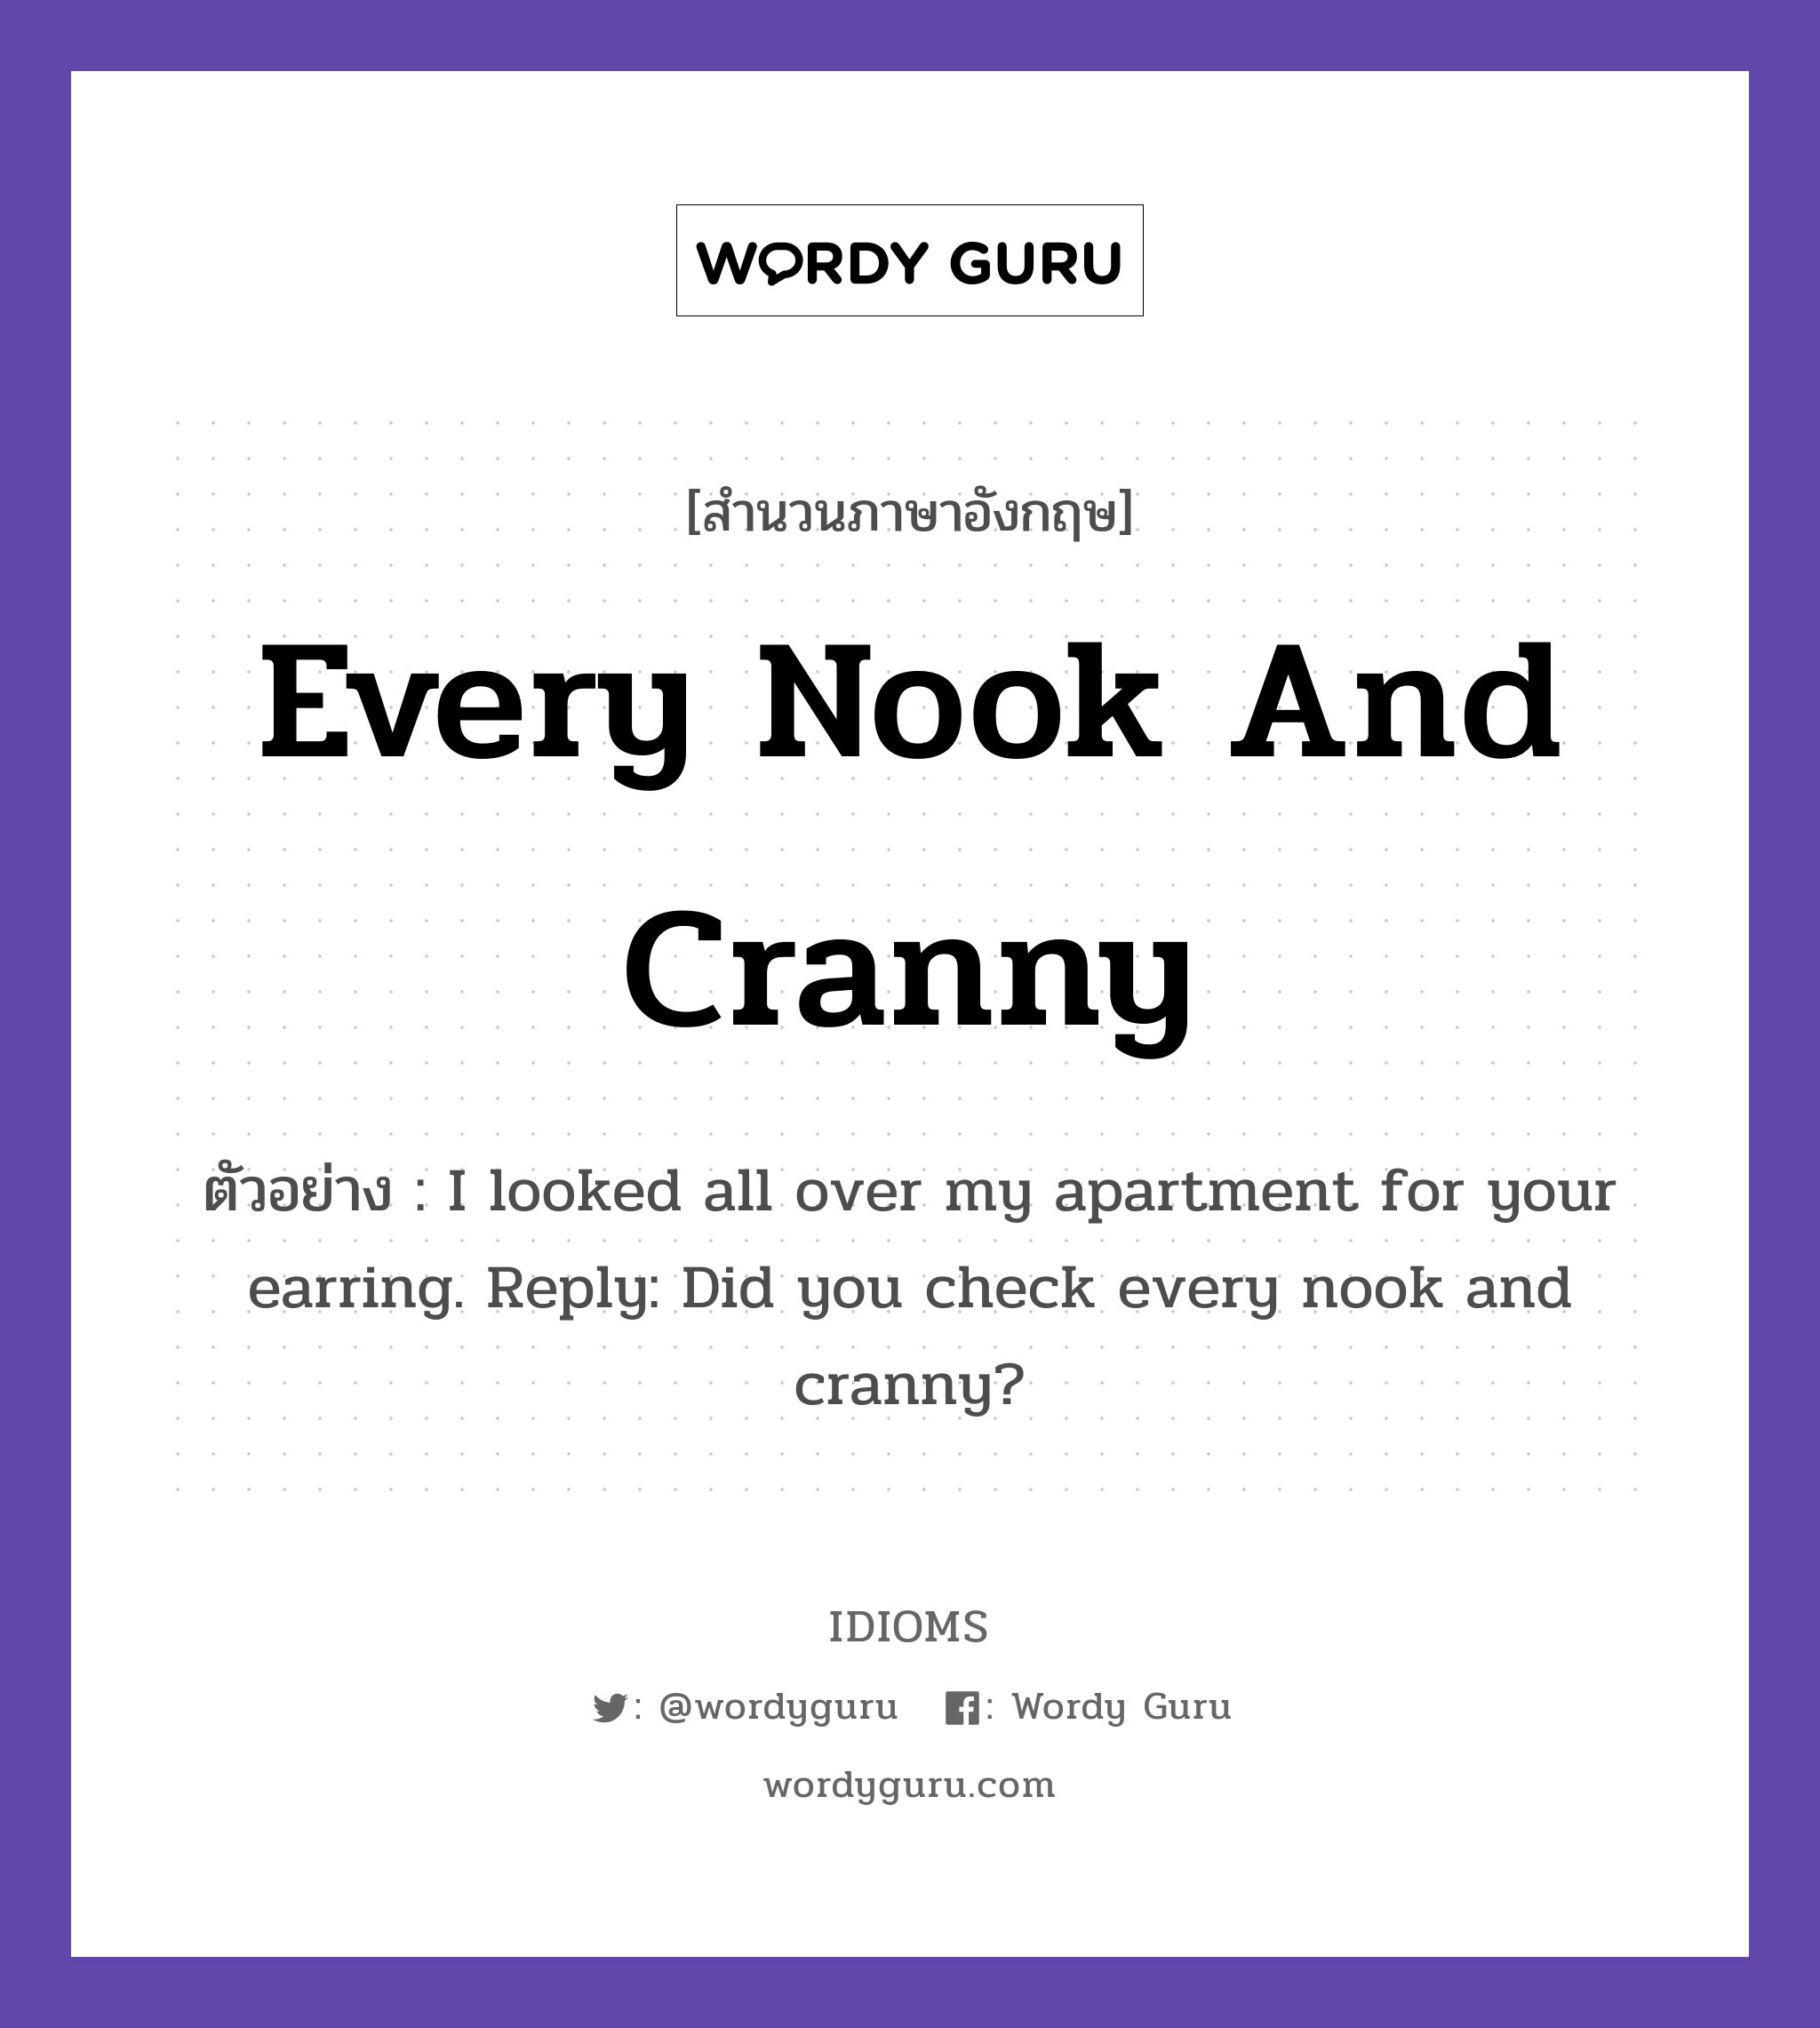 Every Nook And Cranny แปลว่า?, สำนวนภาษาอังกฤษ Every Nook And Cranny ตัวอย่าง I looked all over my apartment for your earring. Reply: Did you check every nook and cranny?